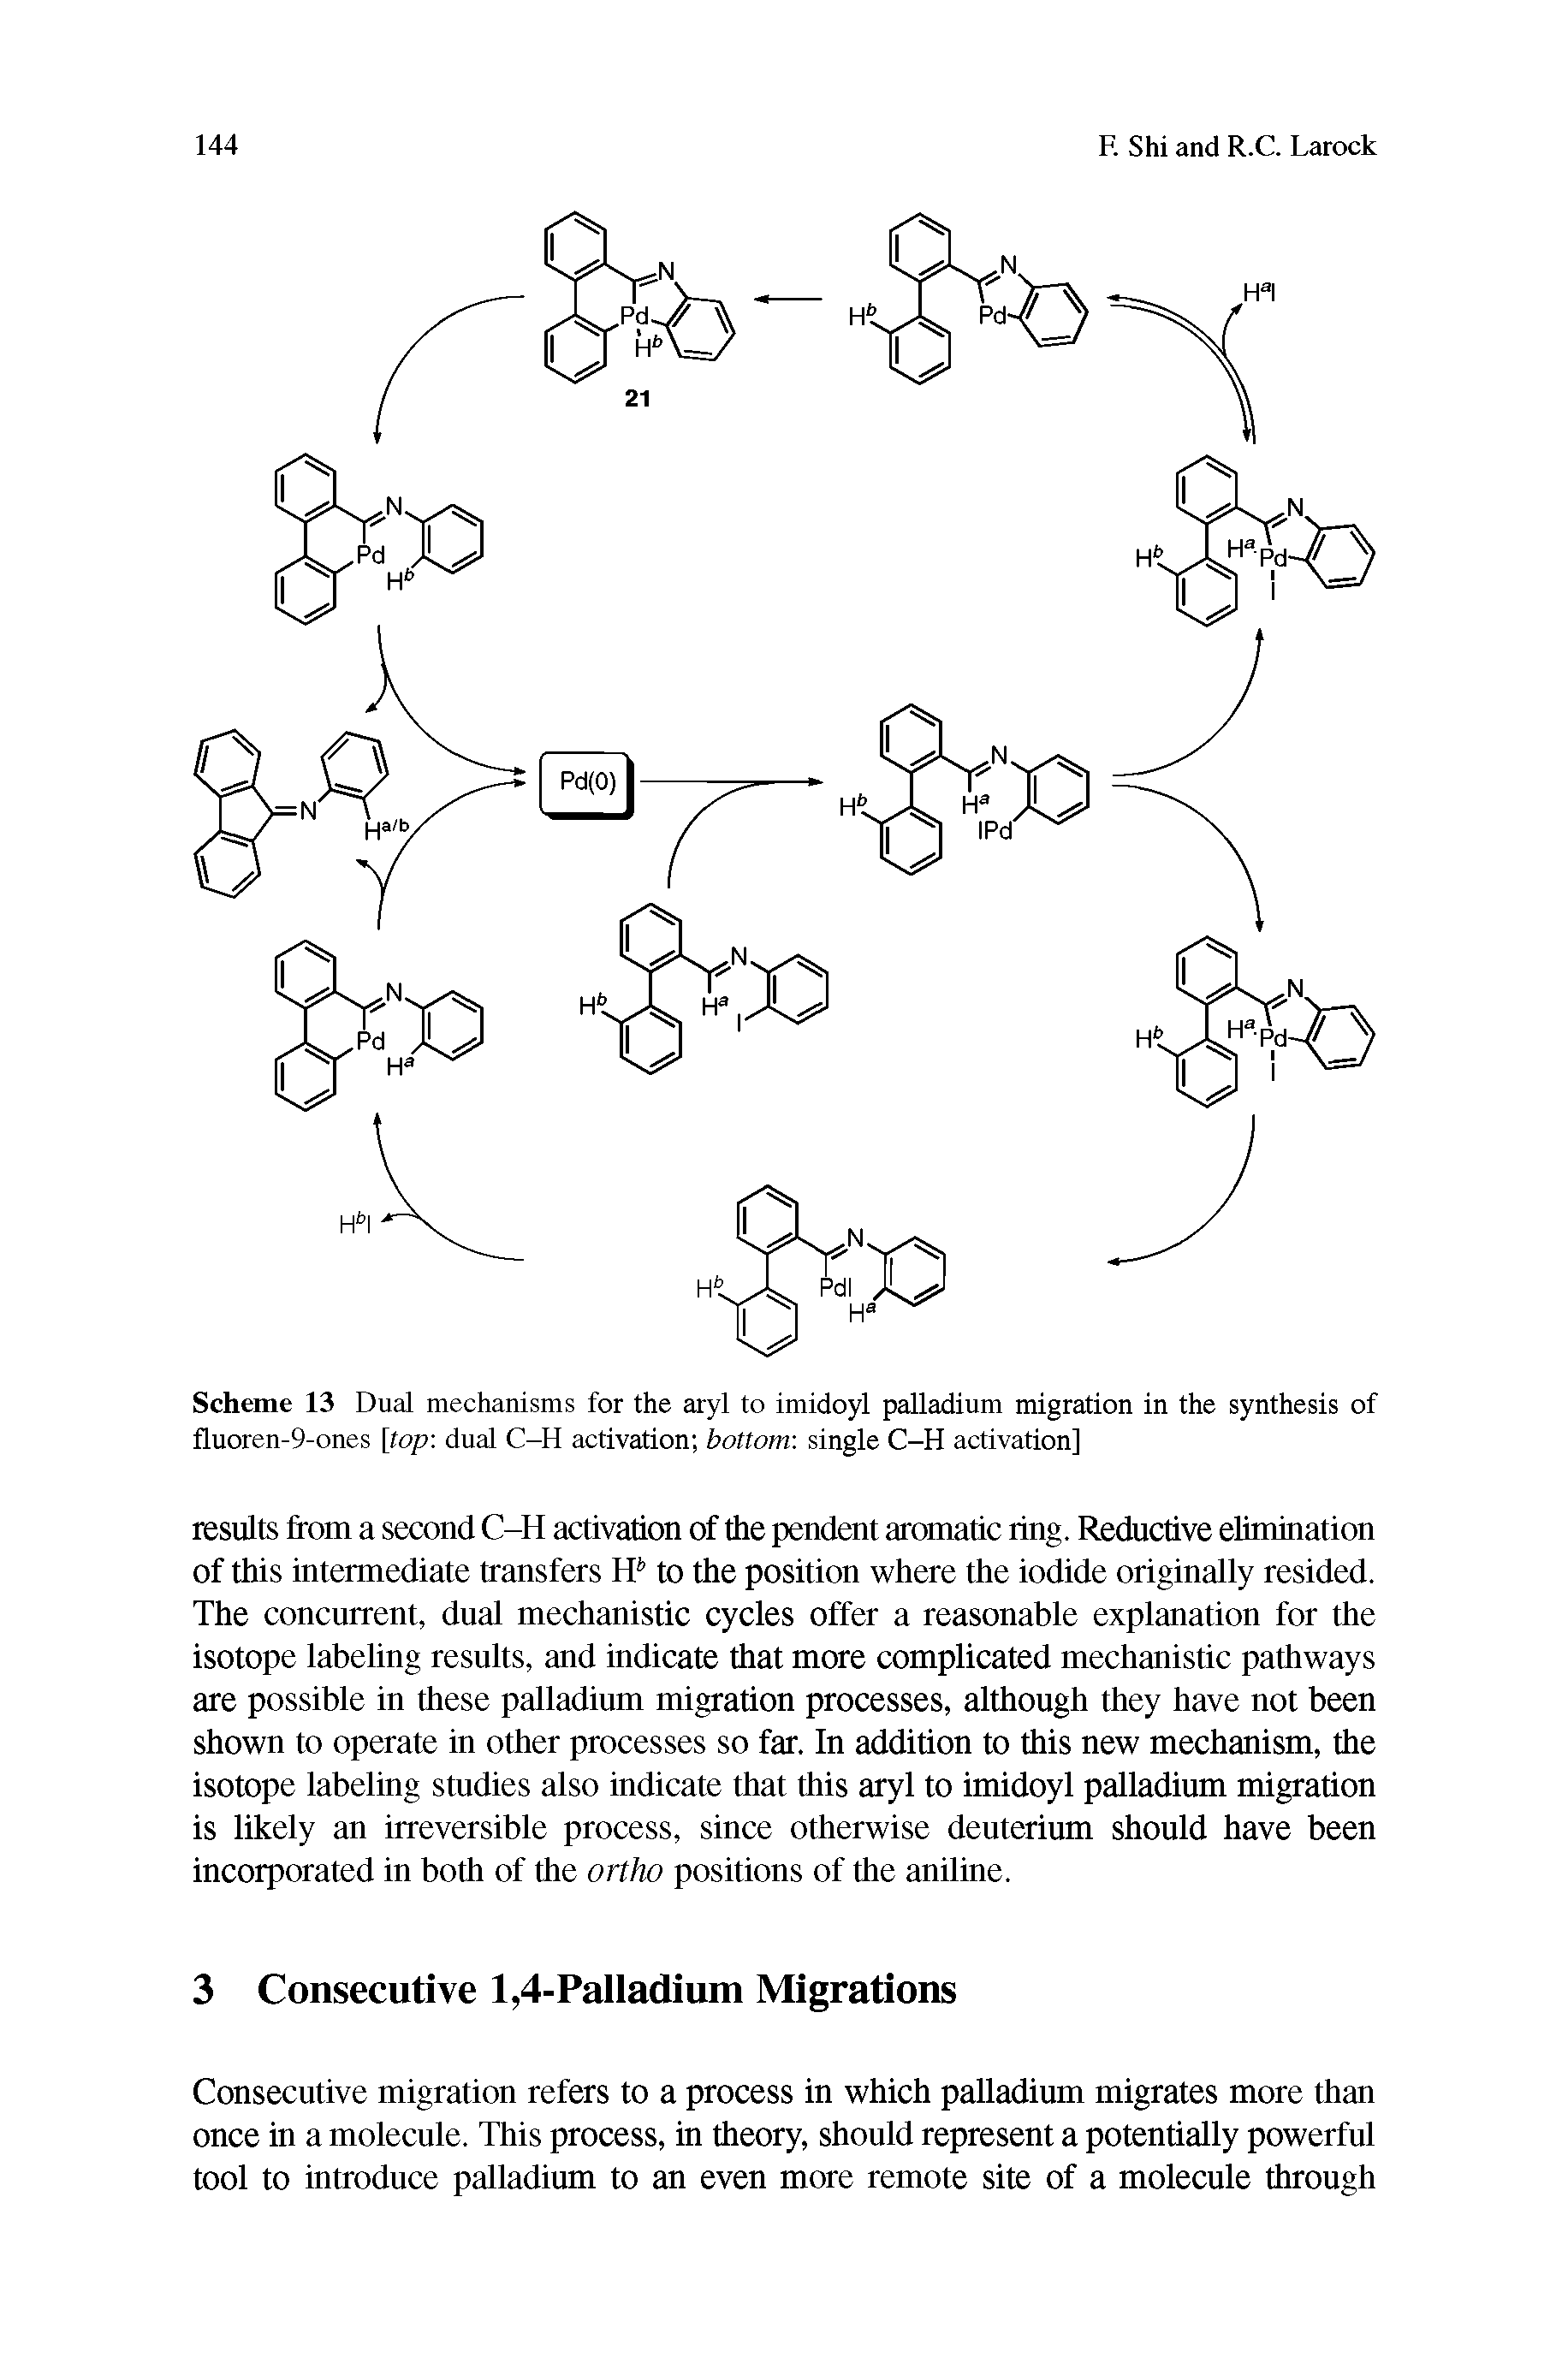 Scheme 13 Dual mechanisms for the aryl to imidoyl palladium migration in the synthesis of fluoren-9-ones [top dual C-H activation bottom single C-H activation]...